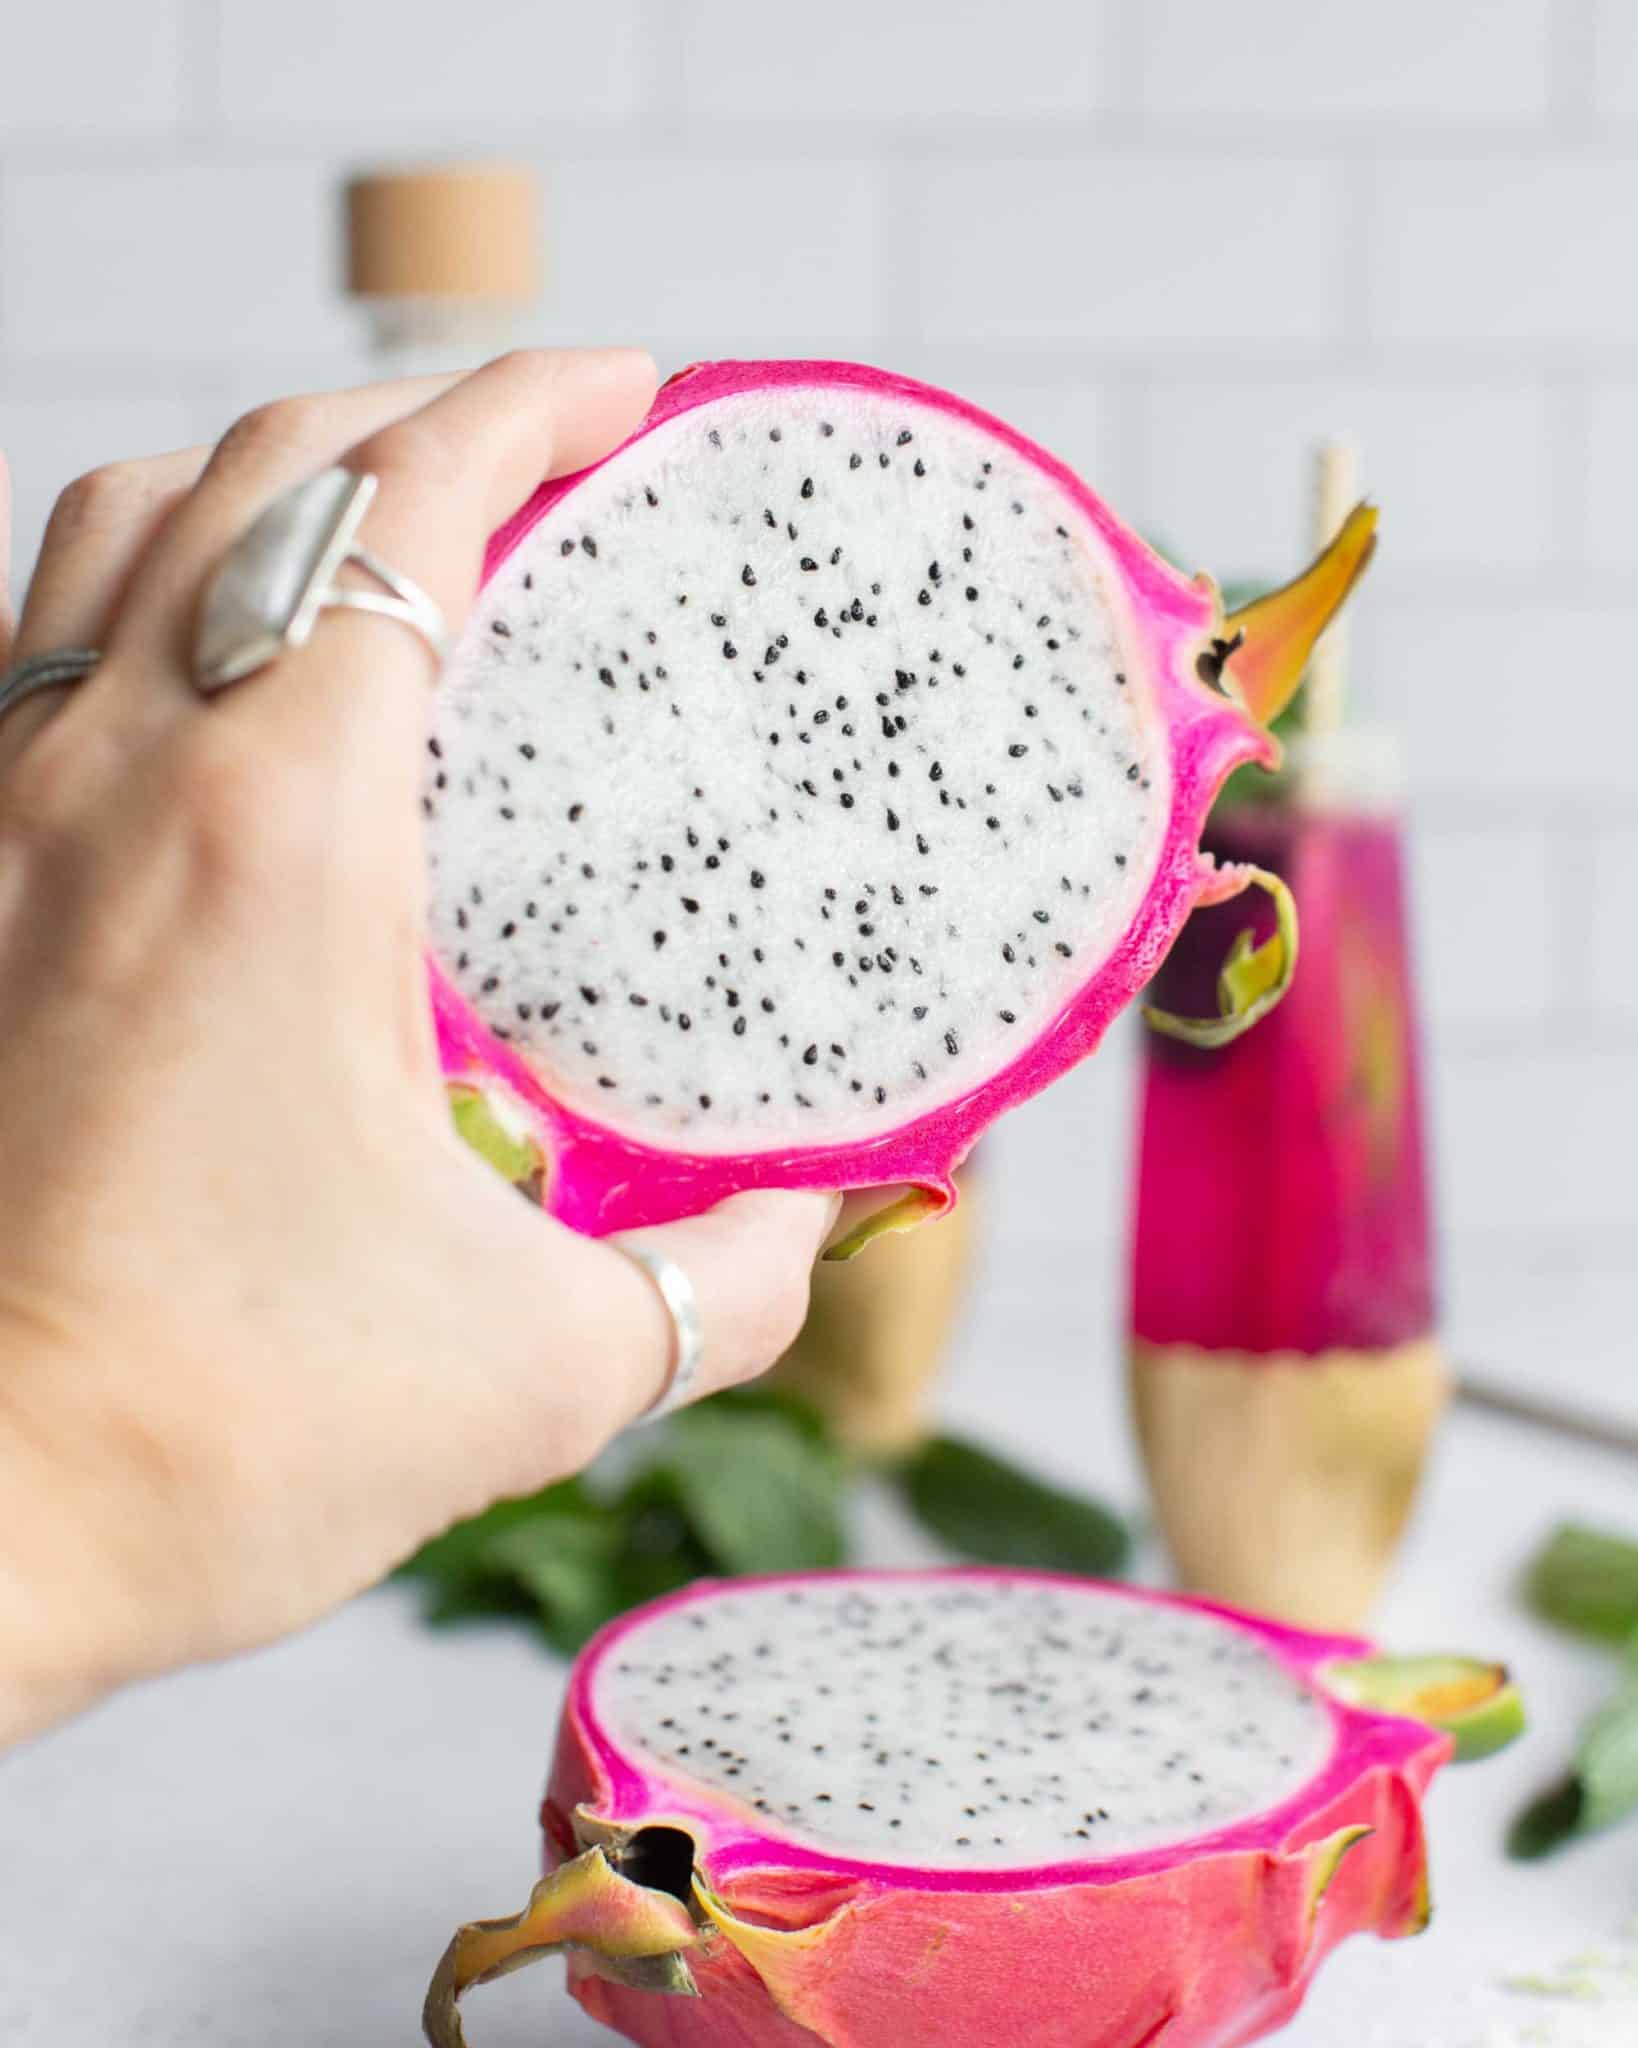 Holding Out a Sliced in Half White Dragonfruit